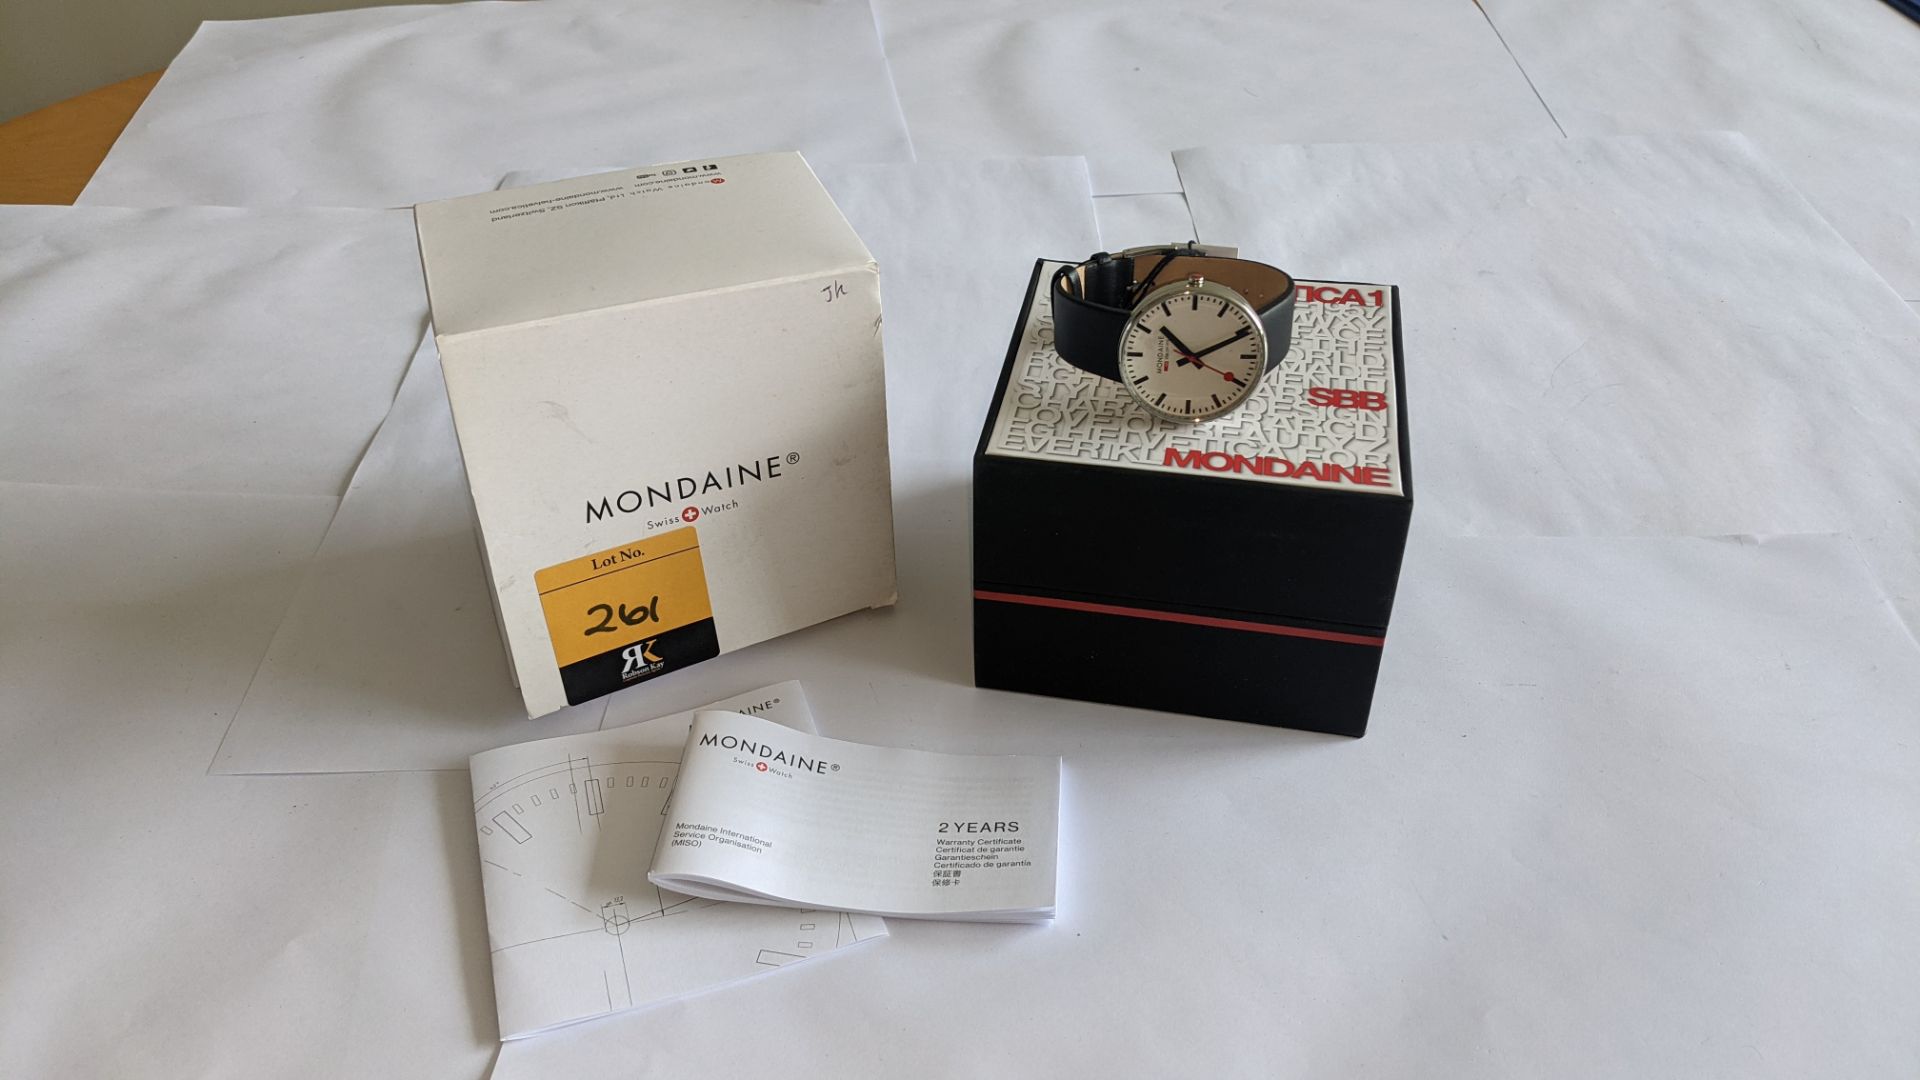 Mondaine watch, product code MSX.4211B.LB. RRP £219. Water resistant, stainless steel case. This l - Image 18 of 18